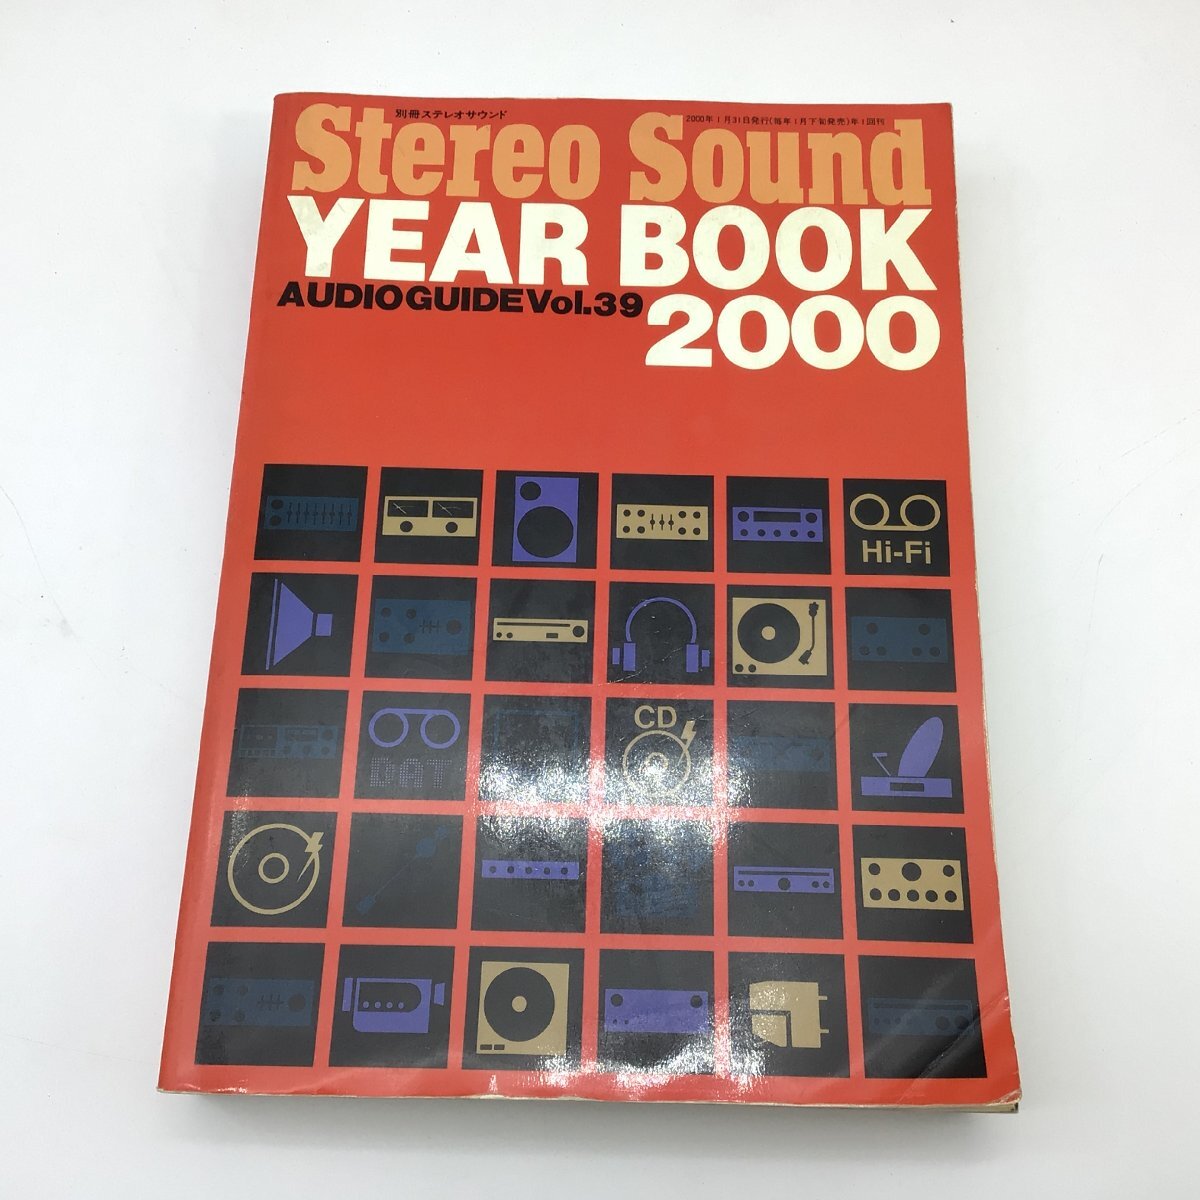 2844 [ out of print book@][ separate volume stereo sound / audio * year book #Stereo Sound YEAR BOOK 2000 /AUDIO GUIDE vol.39